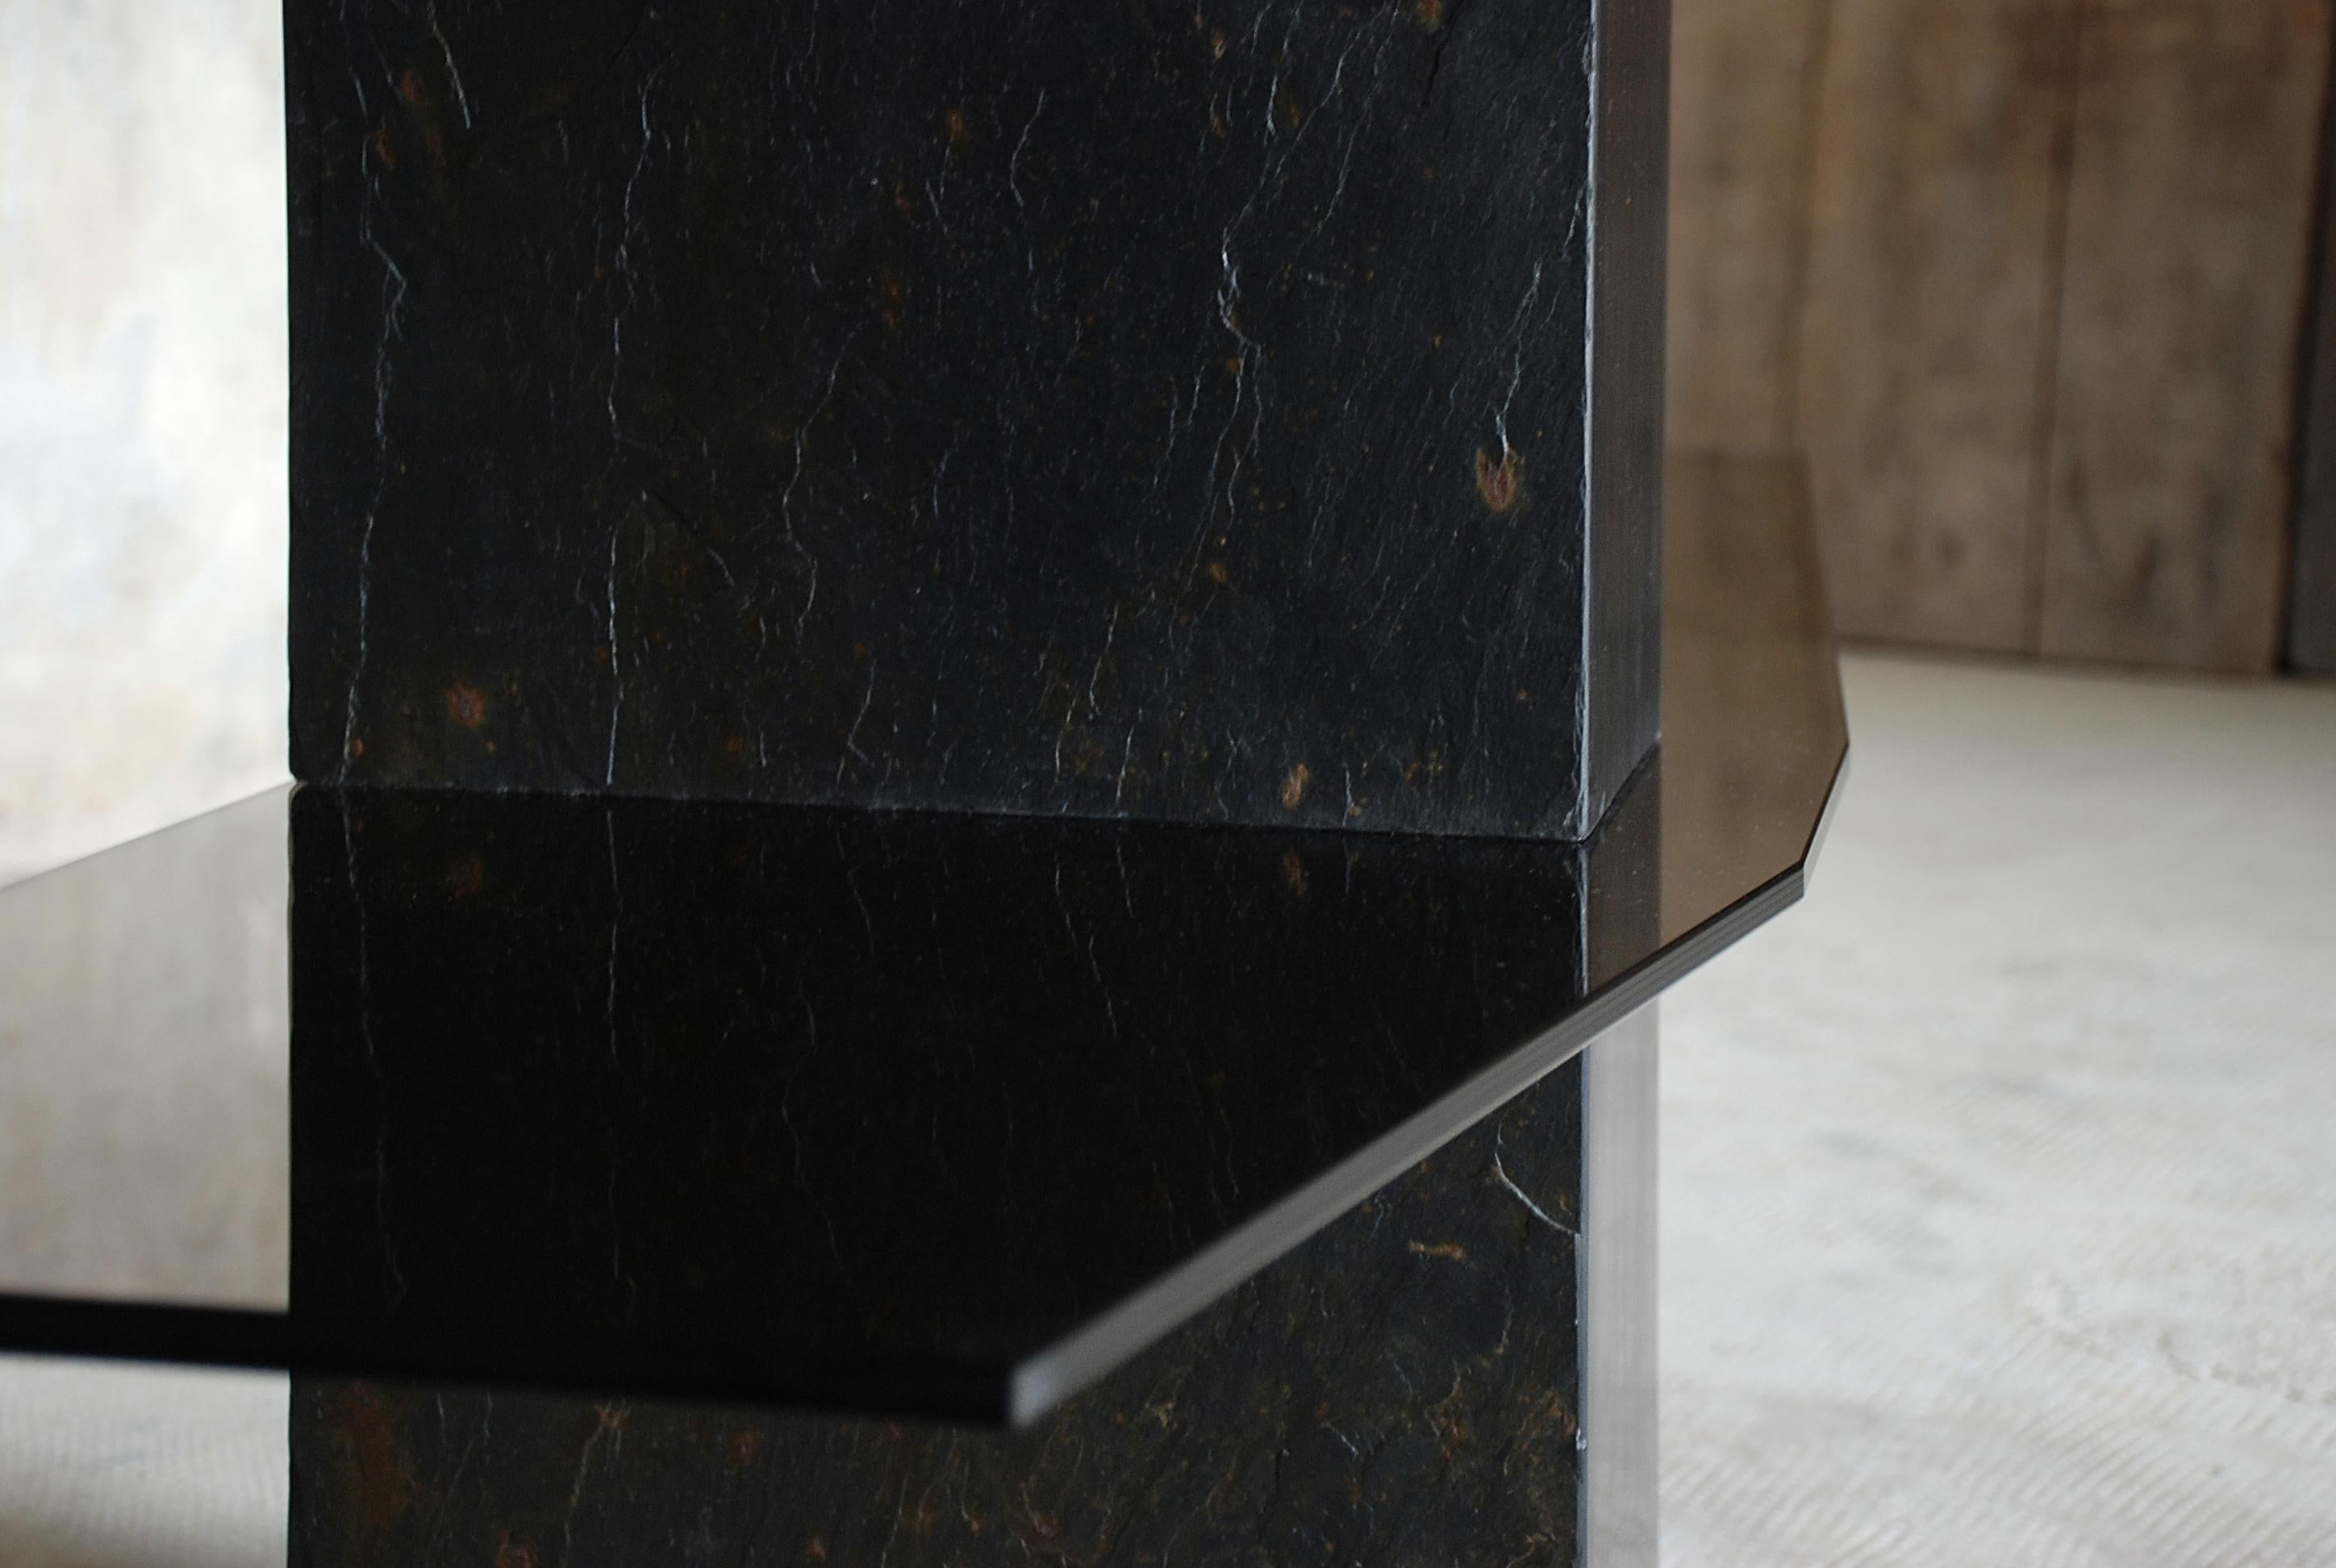 Frederic Saulou, adroit sculpted console shelf
Materials: Tre´laze´ black slate, gray smoked glass.
Dimensions: 90 x 157 x 35 cm.
Edition of 8.
Signed and numbered.

